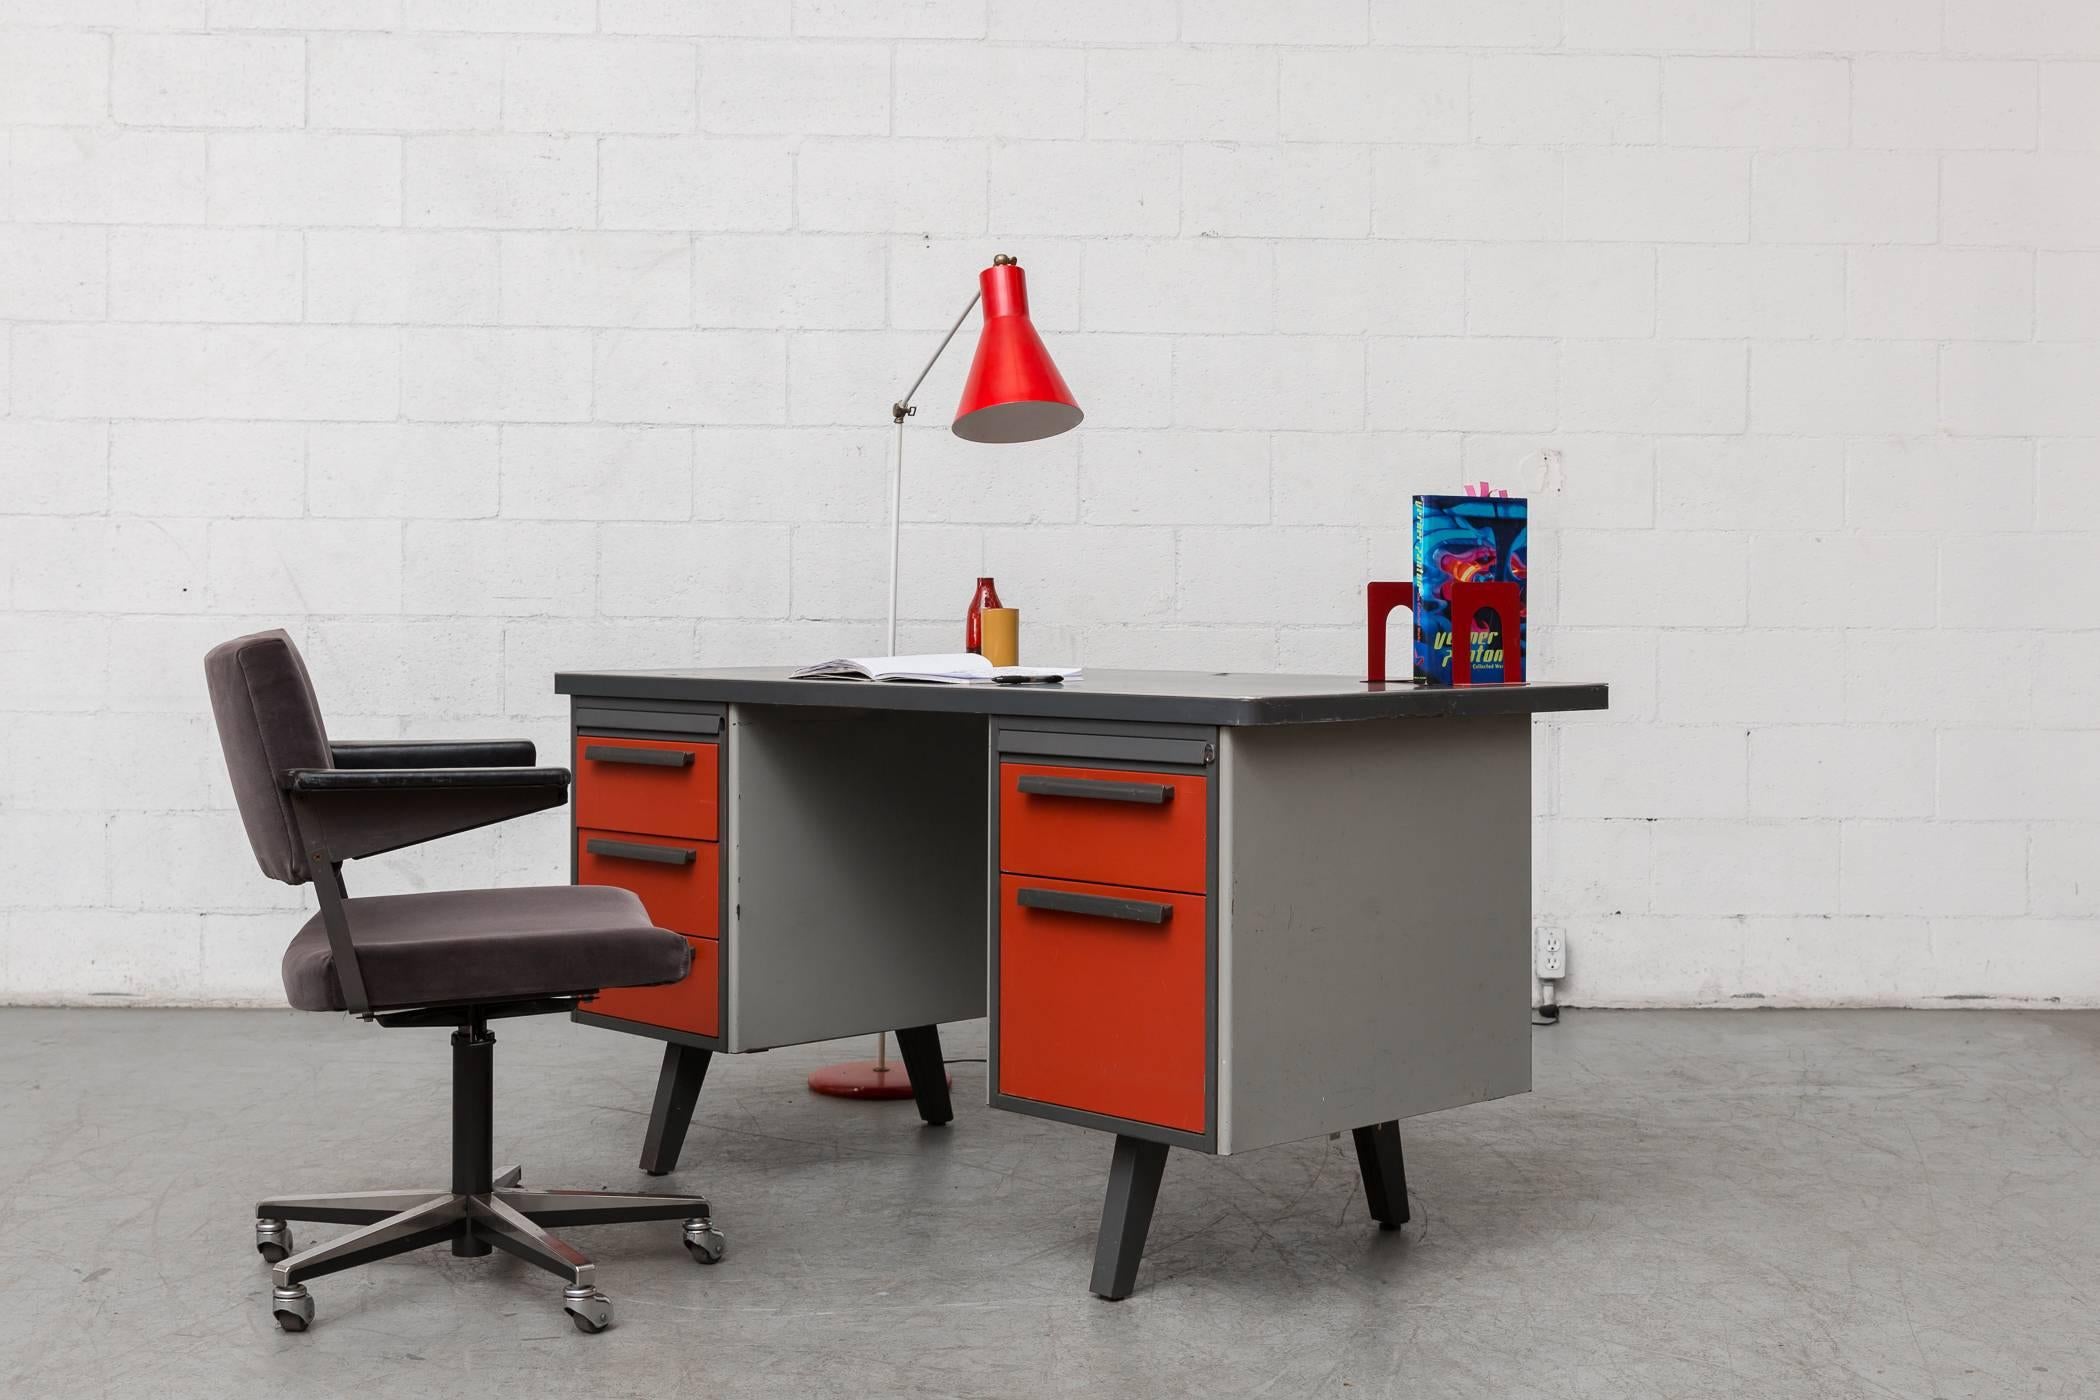 Midcentury Industrial enameled metal framed desk by French Manufacturer Strafor with linoleum top. Drawers are brick red enameled metal: three stacking on the left and one drawer over a file drawer on the right. Linoleum top is in original condition